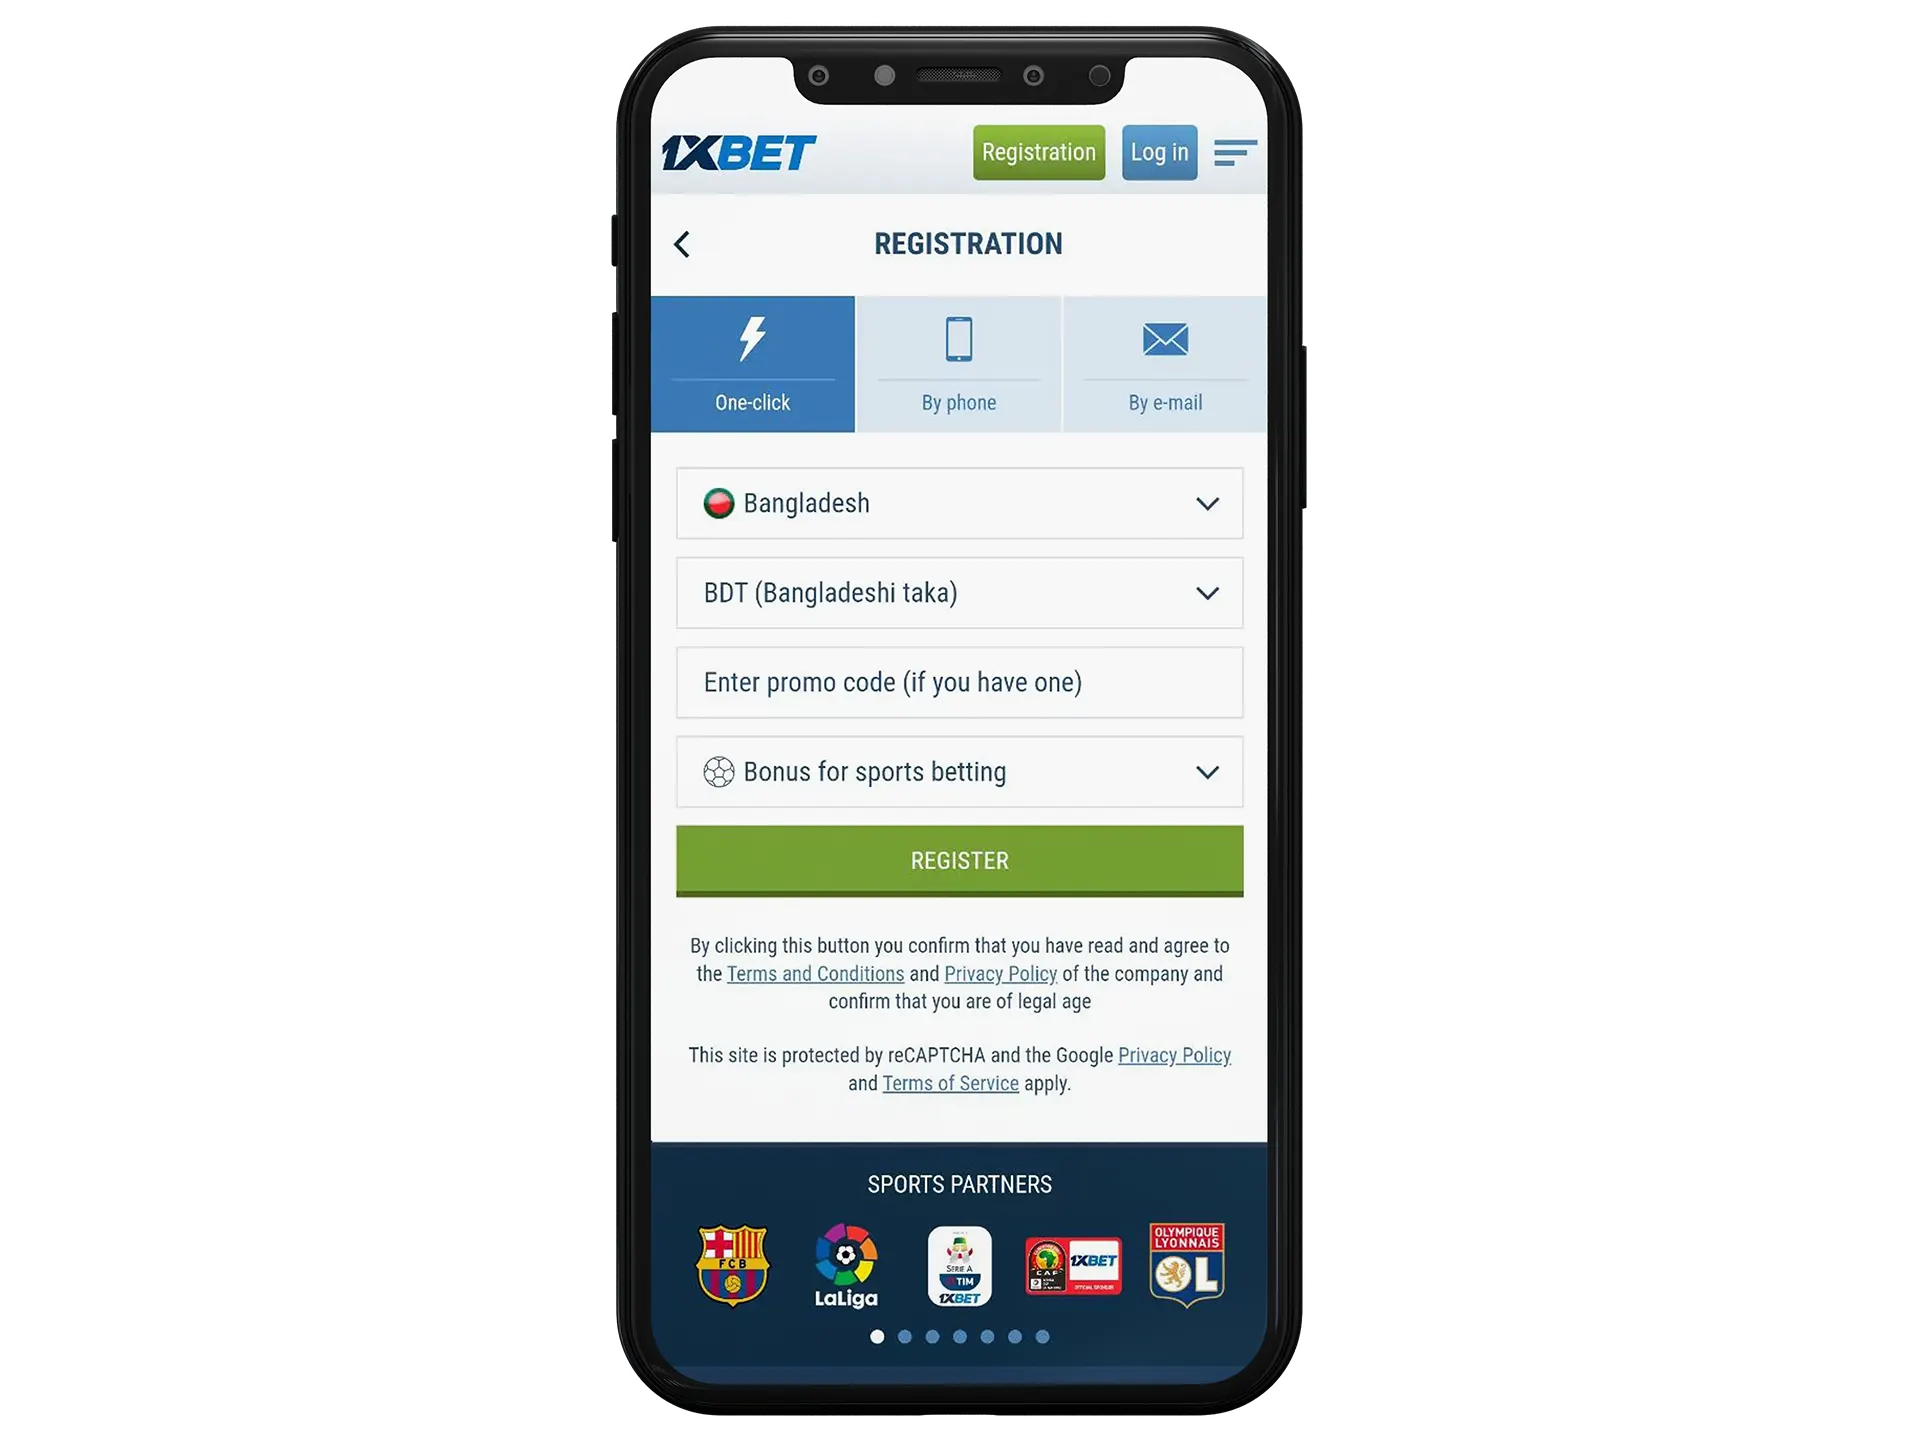 Register an account to download the 1xBet app for iOS.